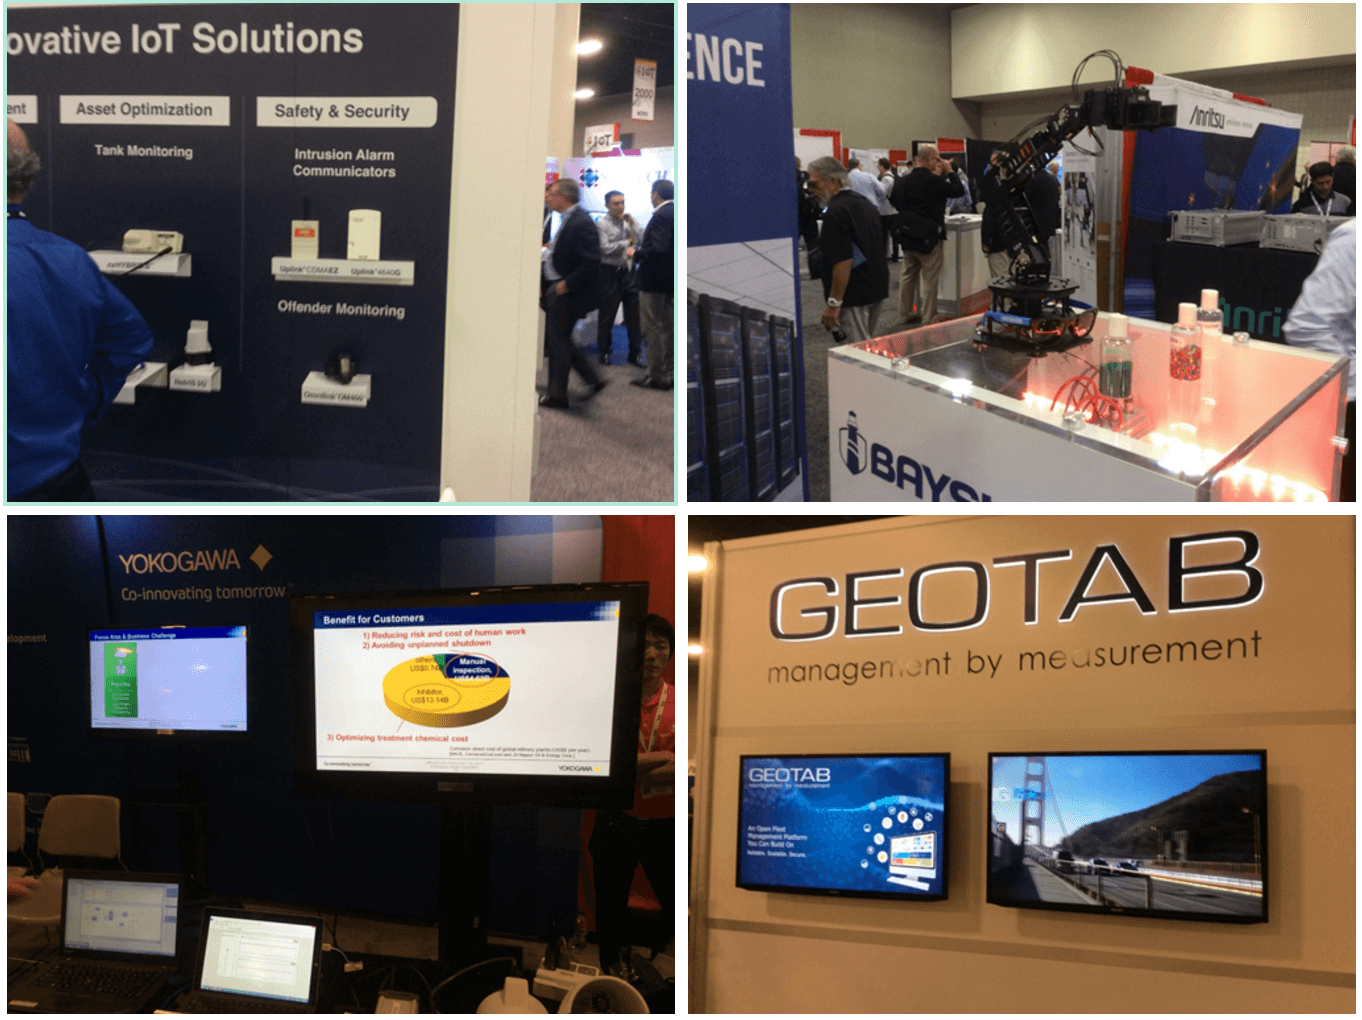 Numerex －Safty and Security System / Bayshore — Remote control & Automated Stop with Alert / Yokogawa — IoT Enablement with partnership (MS etc) / GEOTAB — Fleet management